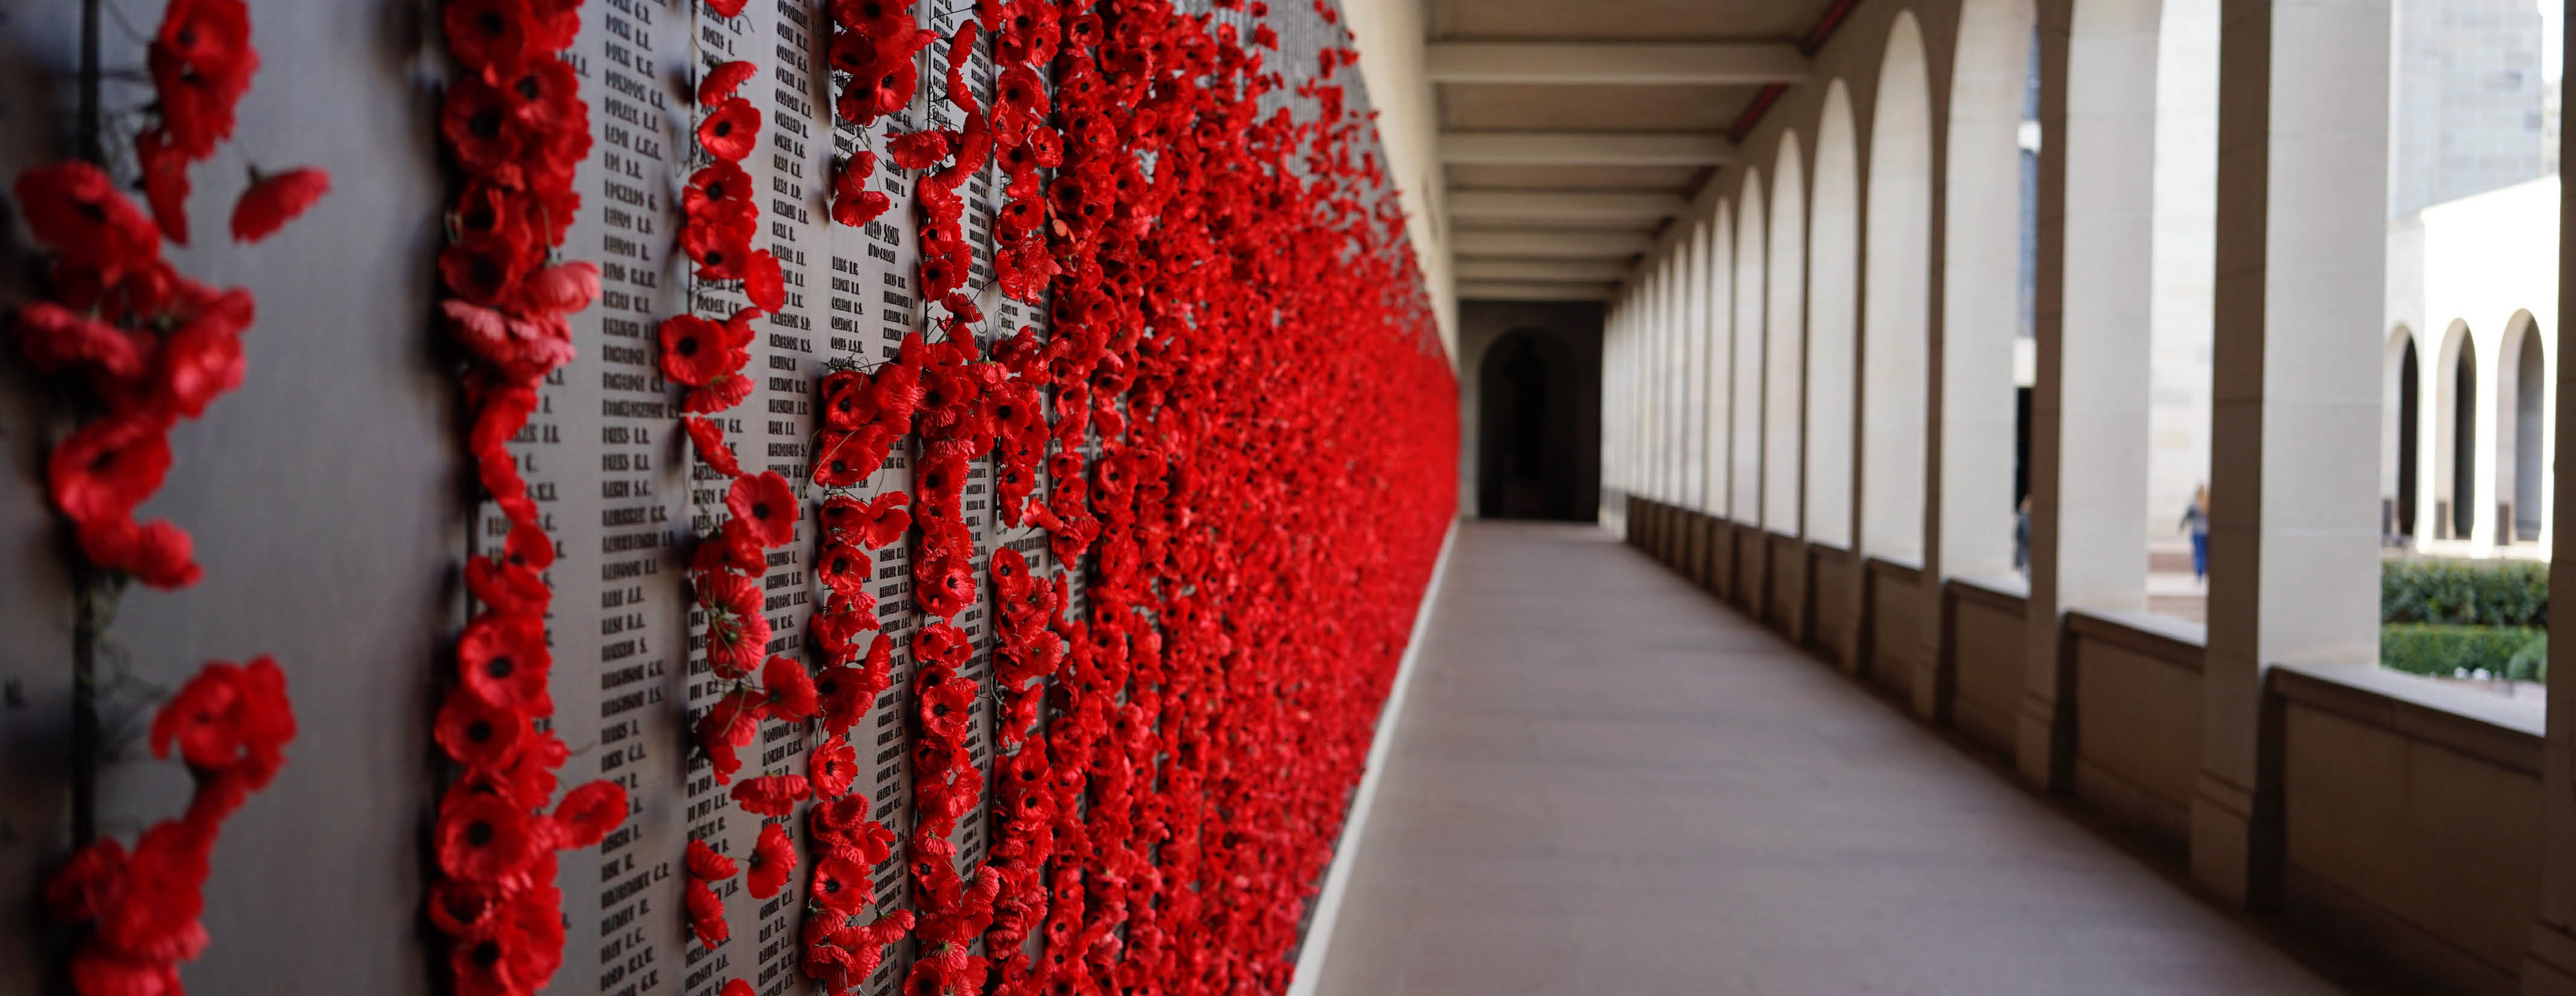 Poppies sprout from a memorial wall at the Australian War Memorial on Anzac Parade. Photo by Tony Liao.